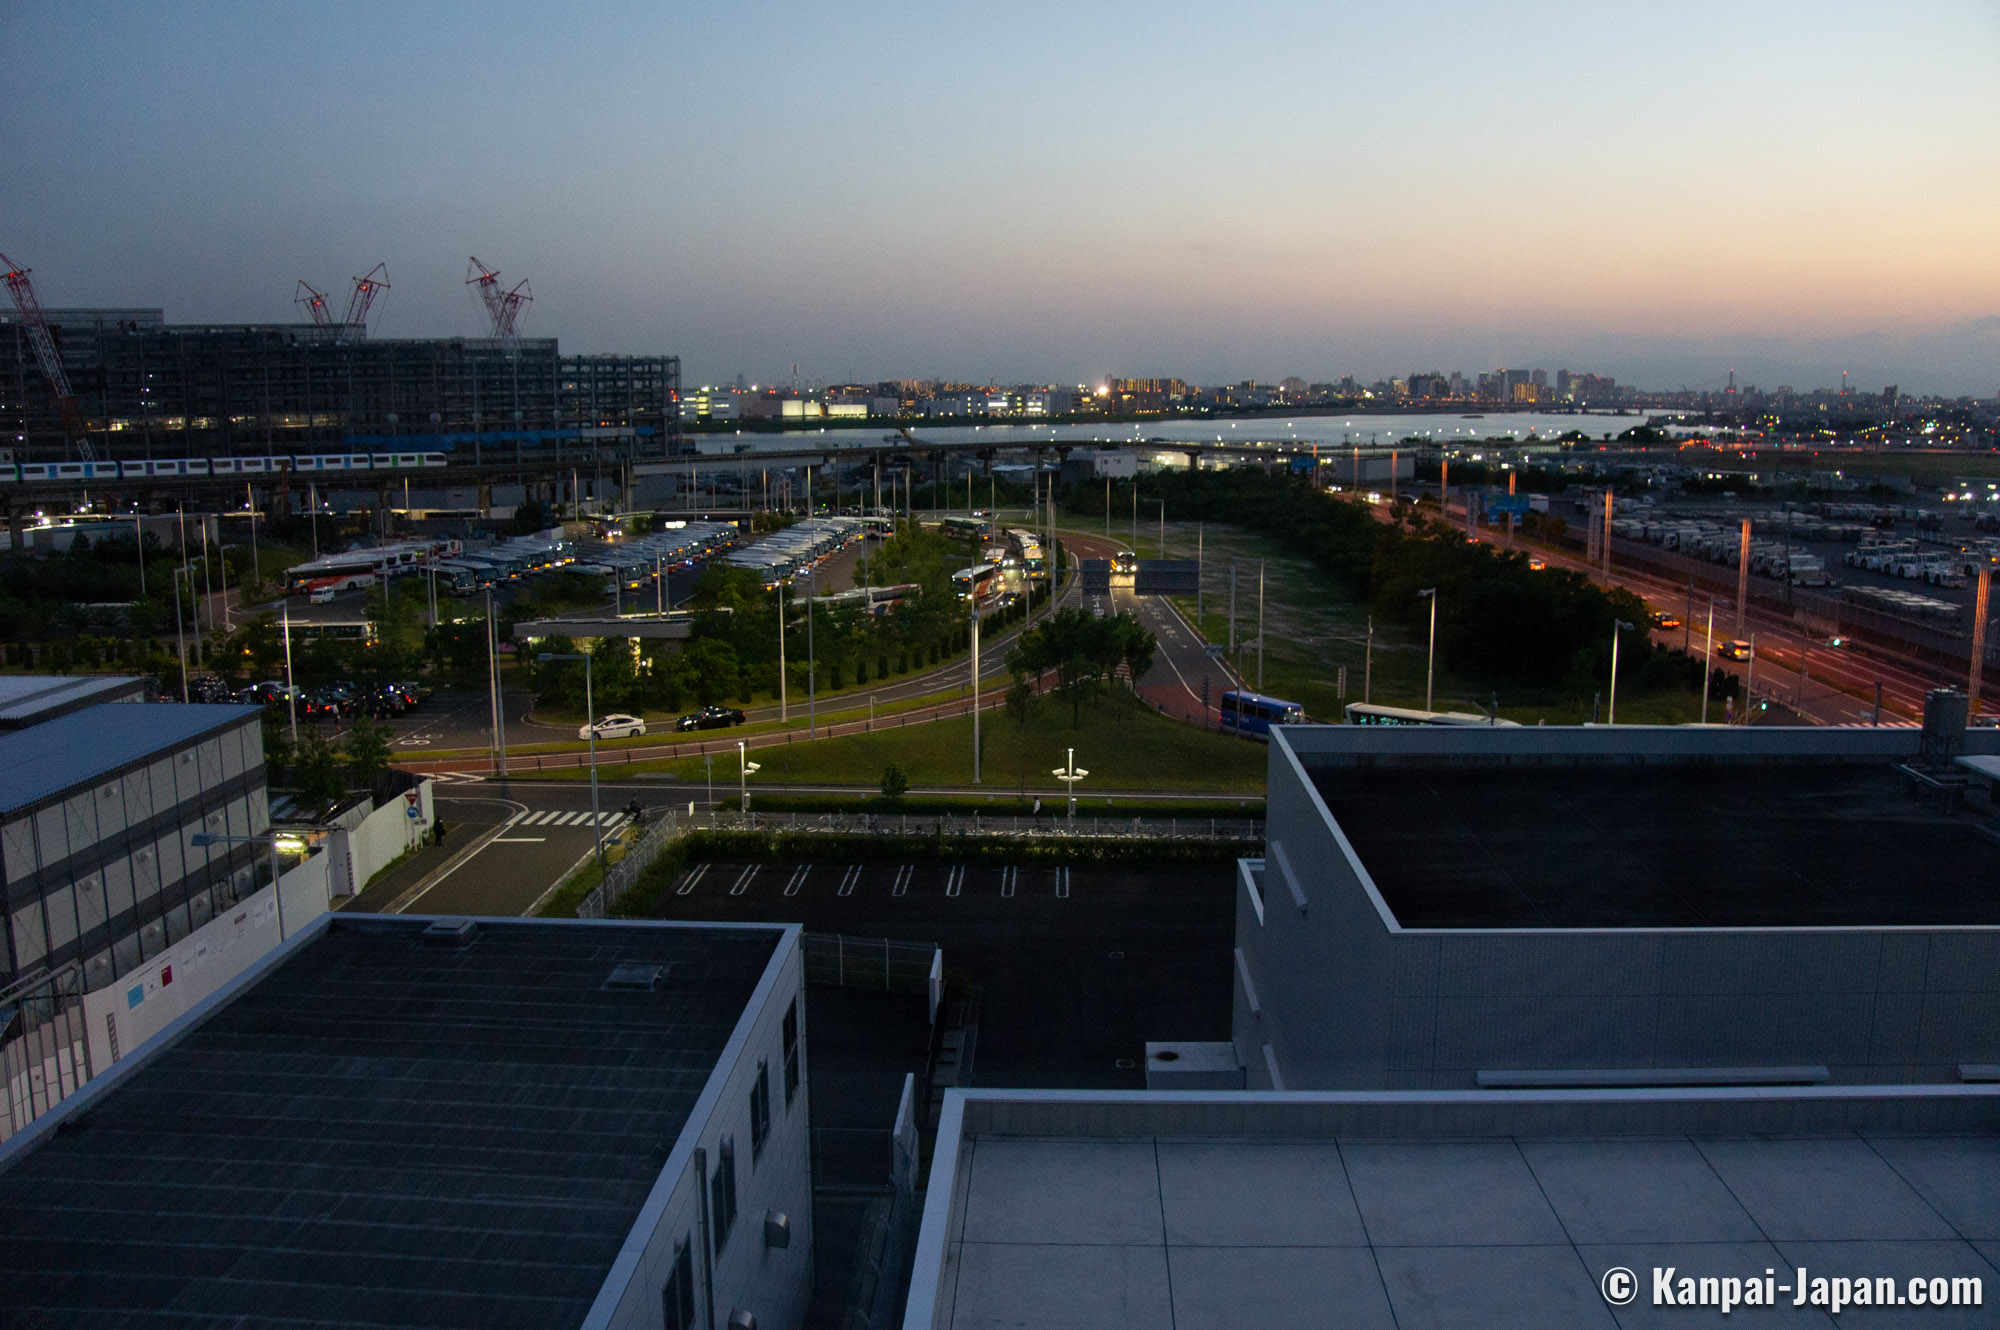 The Royal Park Hotel Haneda (Review) - The Convenient Hotel at the Airport